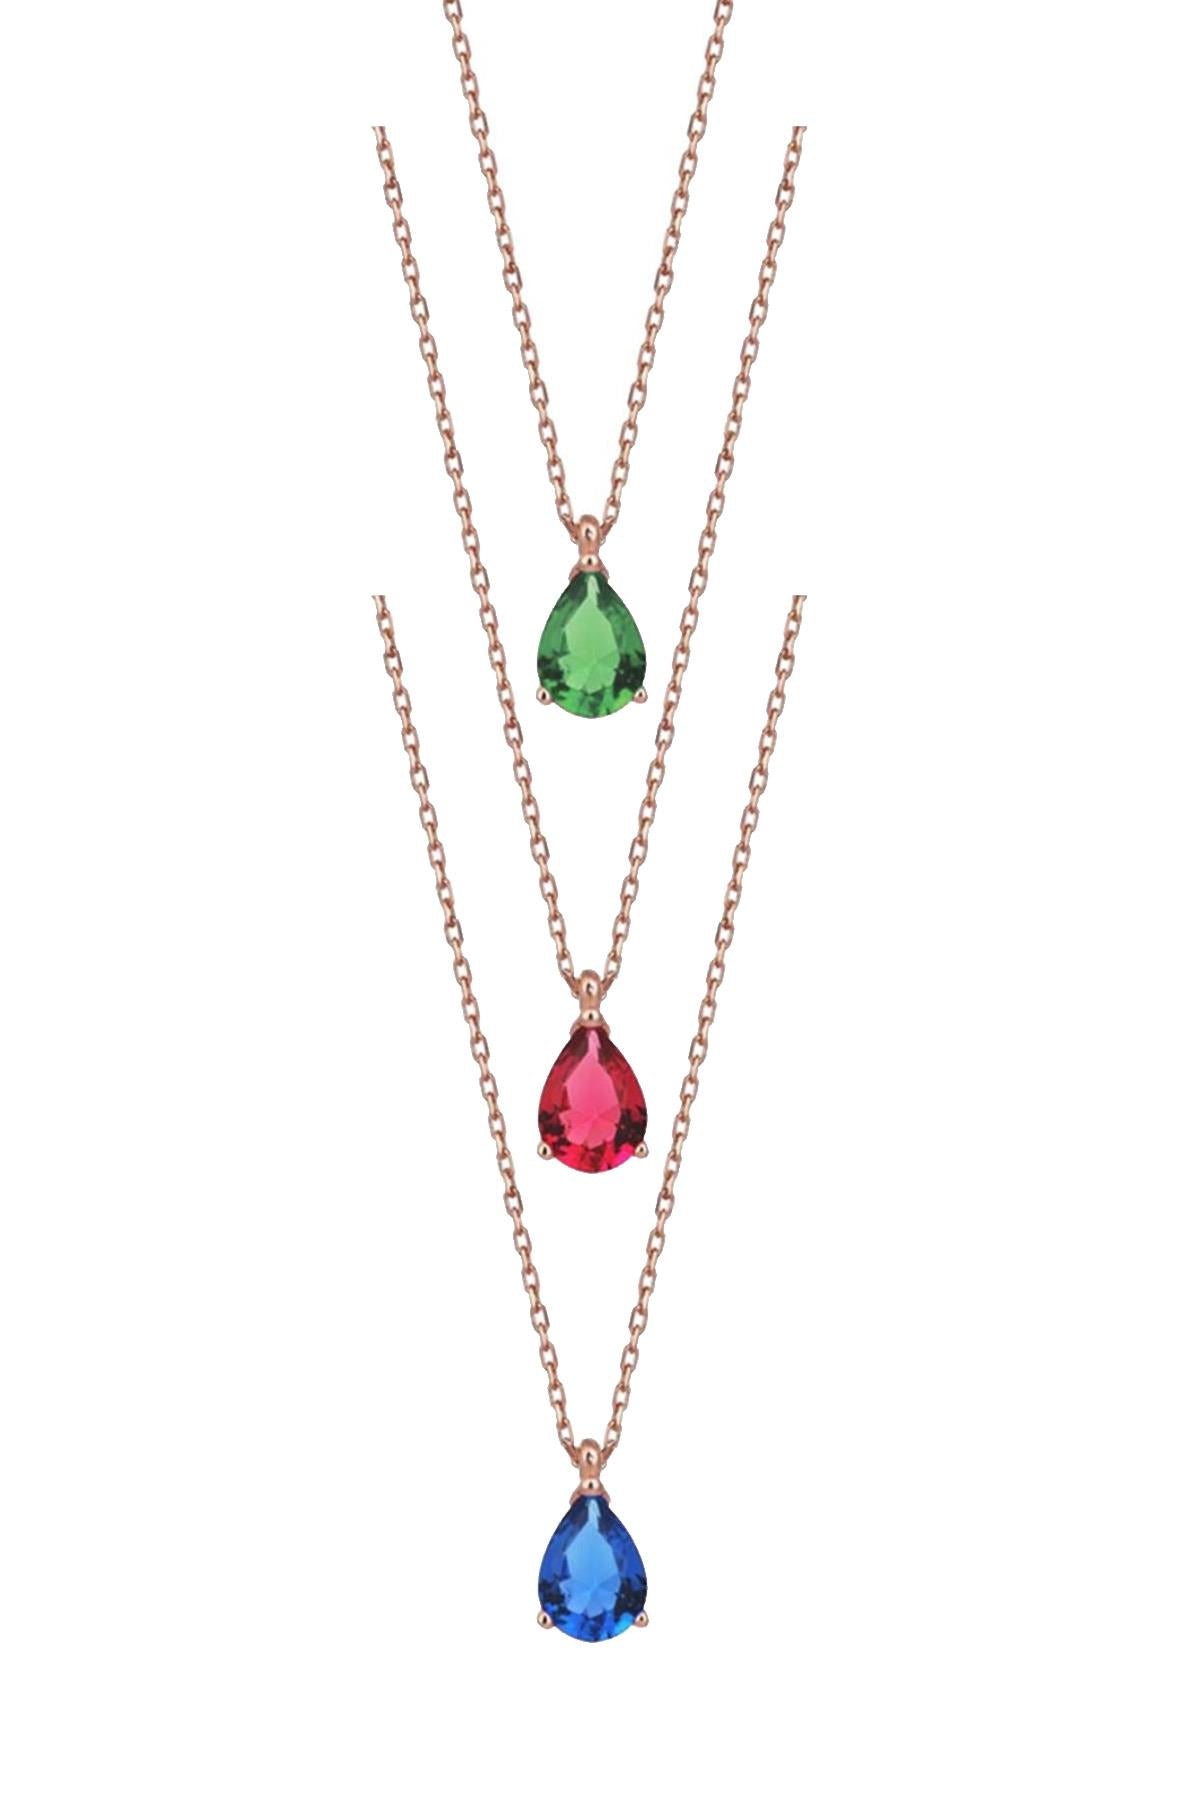 Elegant 925 Sterling Silver Heart Drop Necklace with Miniature 3-Color Gemstone Options - A Symbol of Love and Courage